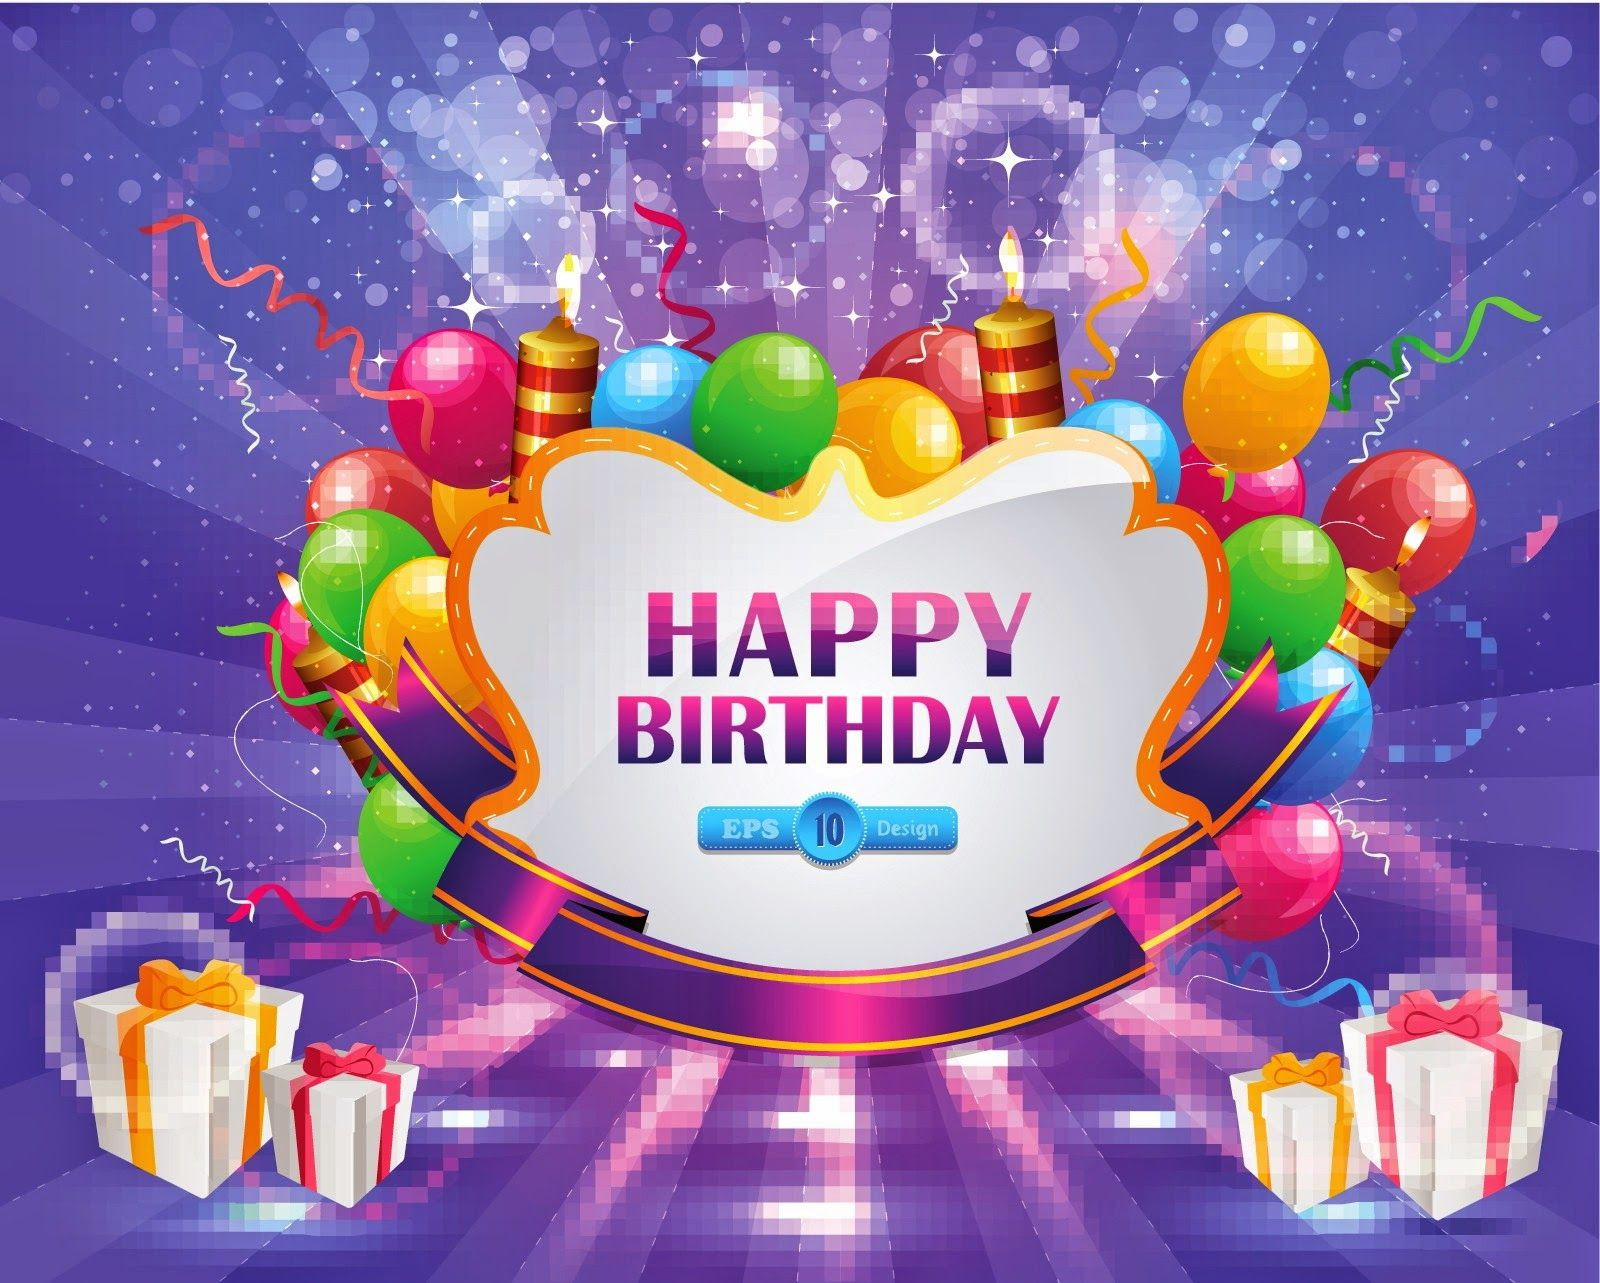 Happy Birthday Wishes Images Free Download
 Happy Birthday Quotes &